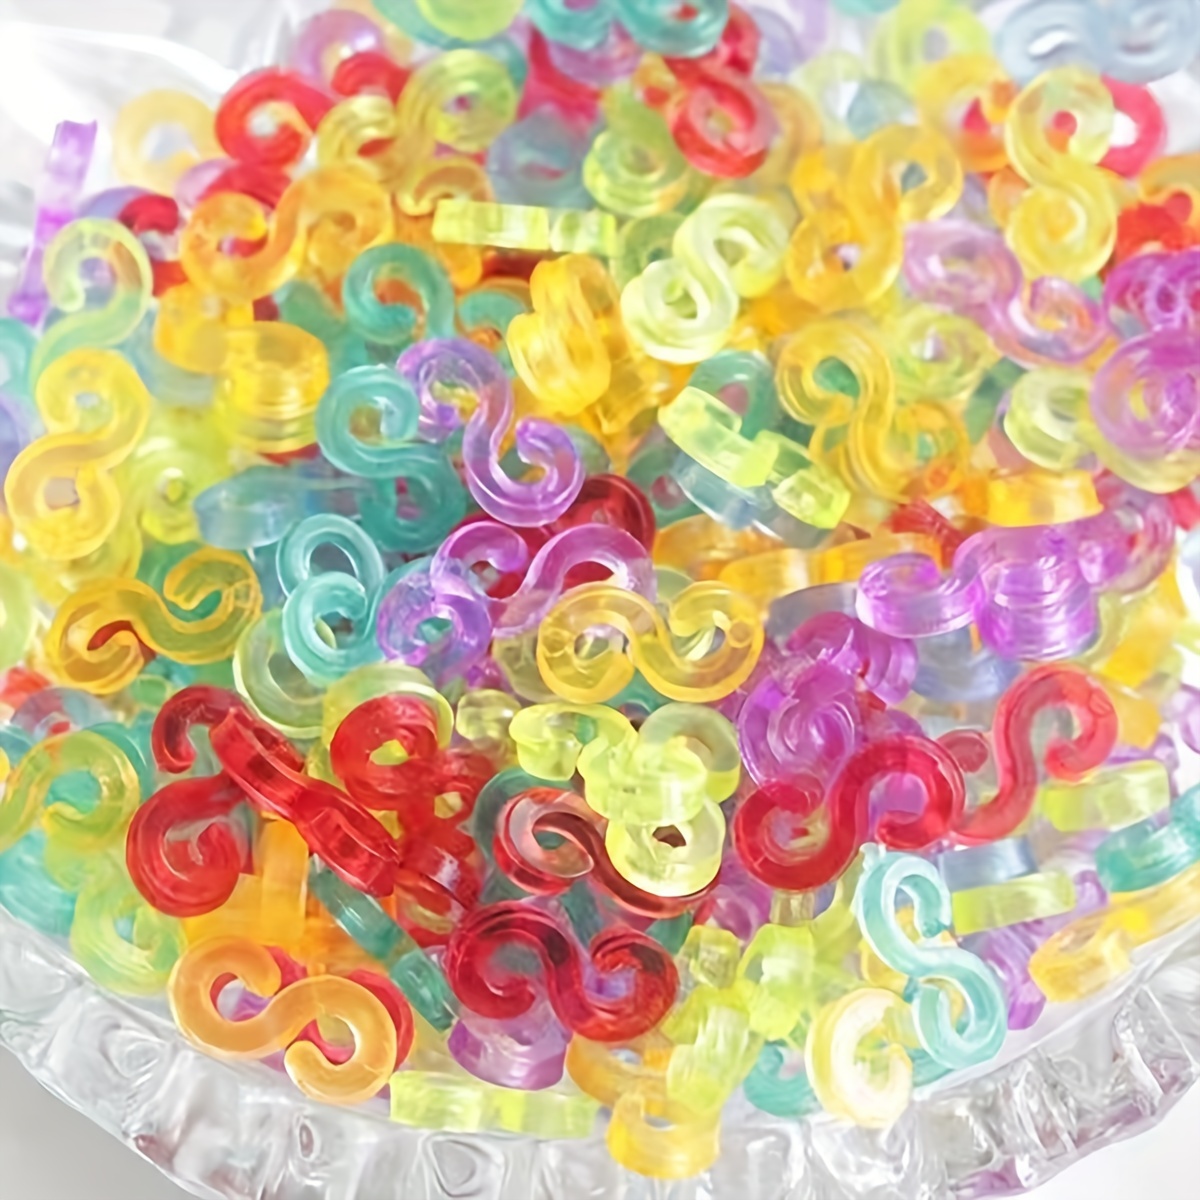  500PCS S Clips Rubber Band Clips Plastic Connectors Refills Kit  Clip for Loom Bracelets DIY Handicrafts, Exquisite Gadgets, Toys for Kids,  Boys and Girls (Colorful) : Toys & Games